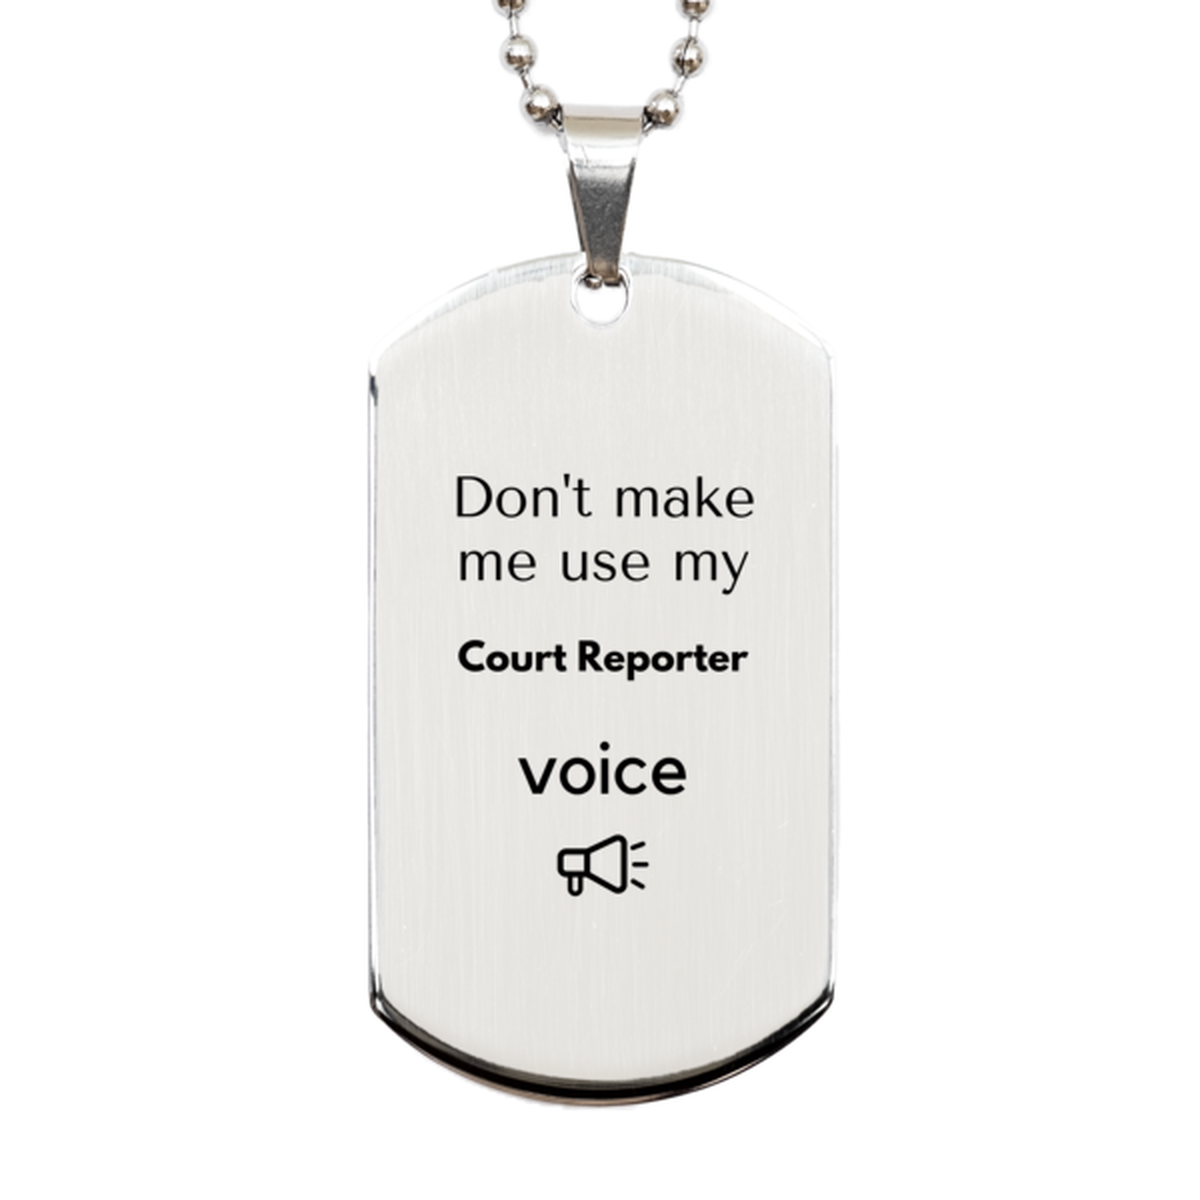 Don't make me use my Court Reporter voice, Sarcasm Court Reporter Gifts, Christmas Court Reporter Silver Dog Tag Birthday Unique Gifts For Court Reporter Coworkers, Men, Women, Colleague, Friends